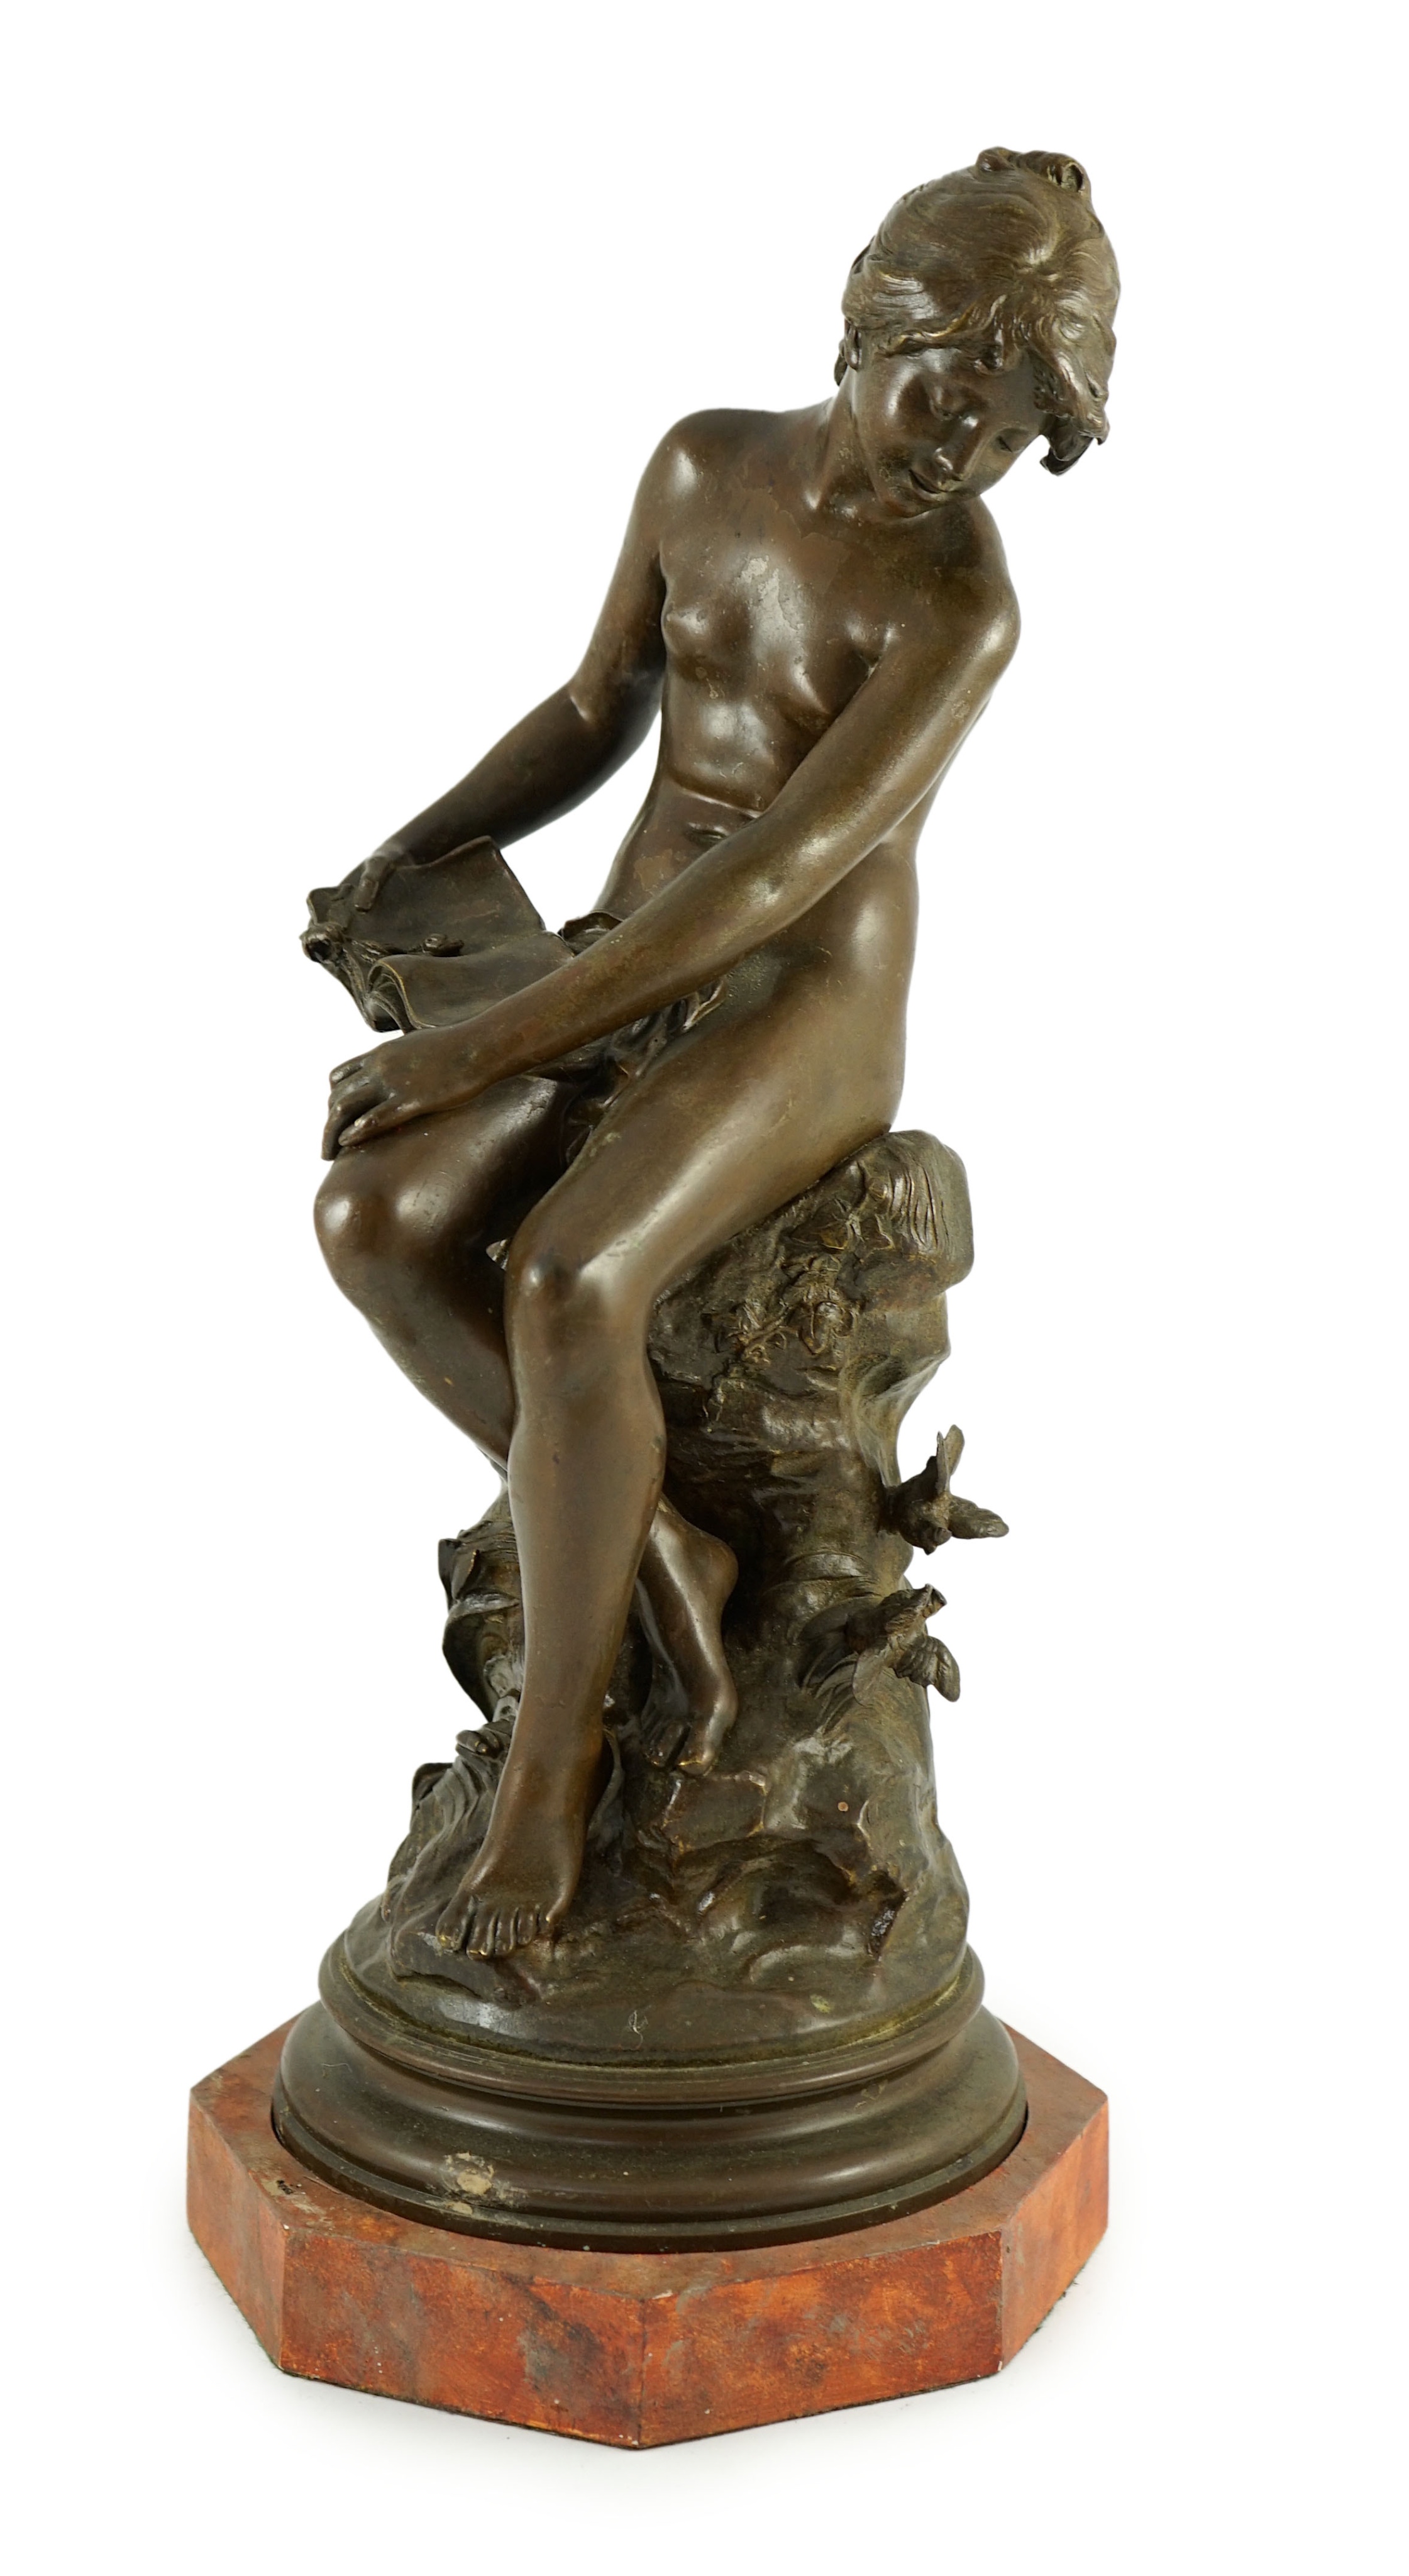 Auguste Moreau (French, 1834-1917). A bronze figure of a nude girl seated on a mound holding a book with birds at her feet, overall height 45cm